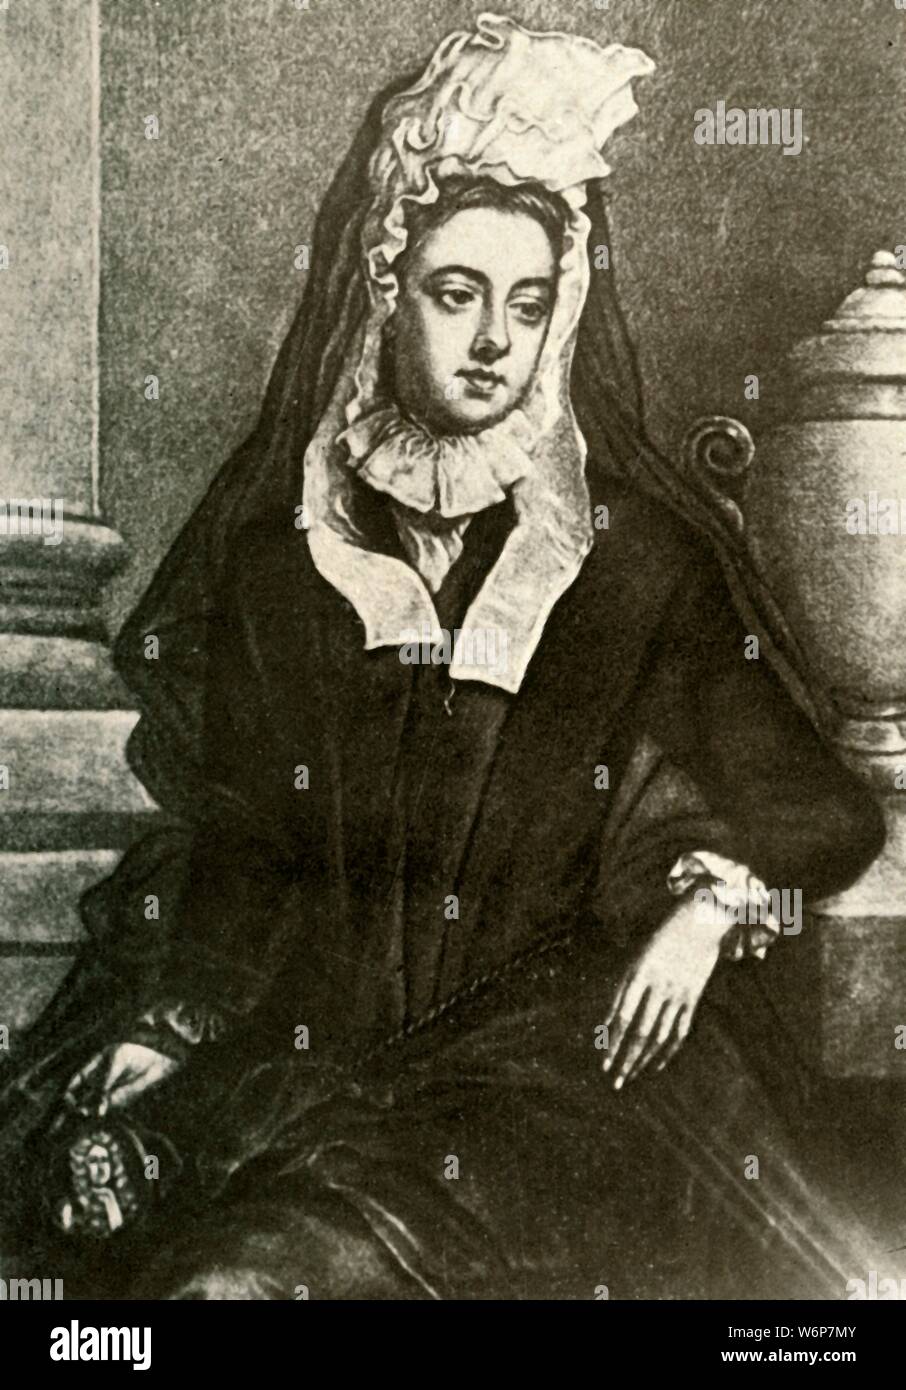 'Portrait of Lady Fenwick, showing widow's mourning', 1695, (1937). Lady Mary Fenwick, (c1646-1708), Wife of Sir John Fenwick executed for Jacobite conspiracy on 28 January 1697.  From &quot;History of American Costume - Book One 1607-1800&quot;, by Elisabeth McClellan. [Tudor Publishing Company, New York, 1937] Stock Photo